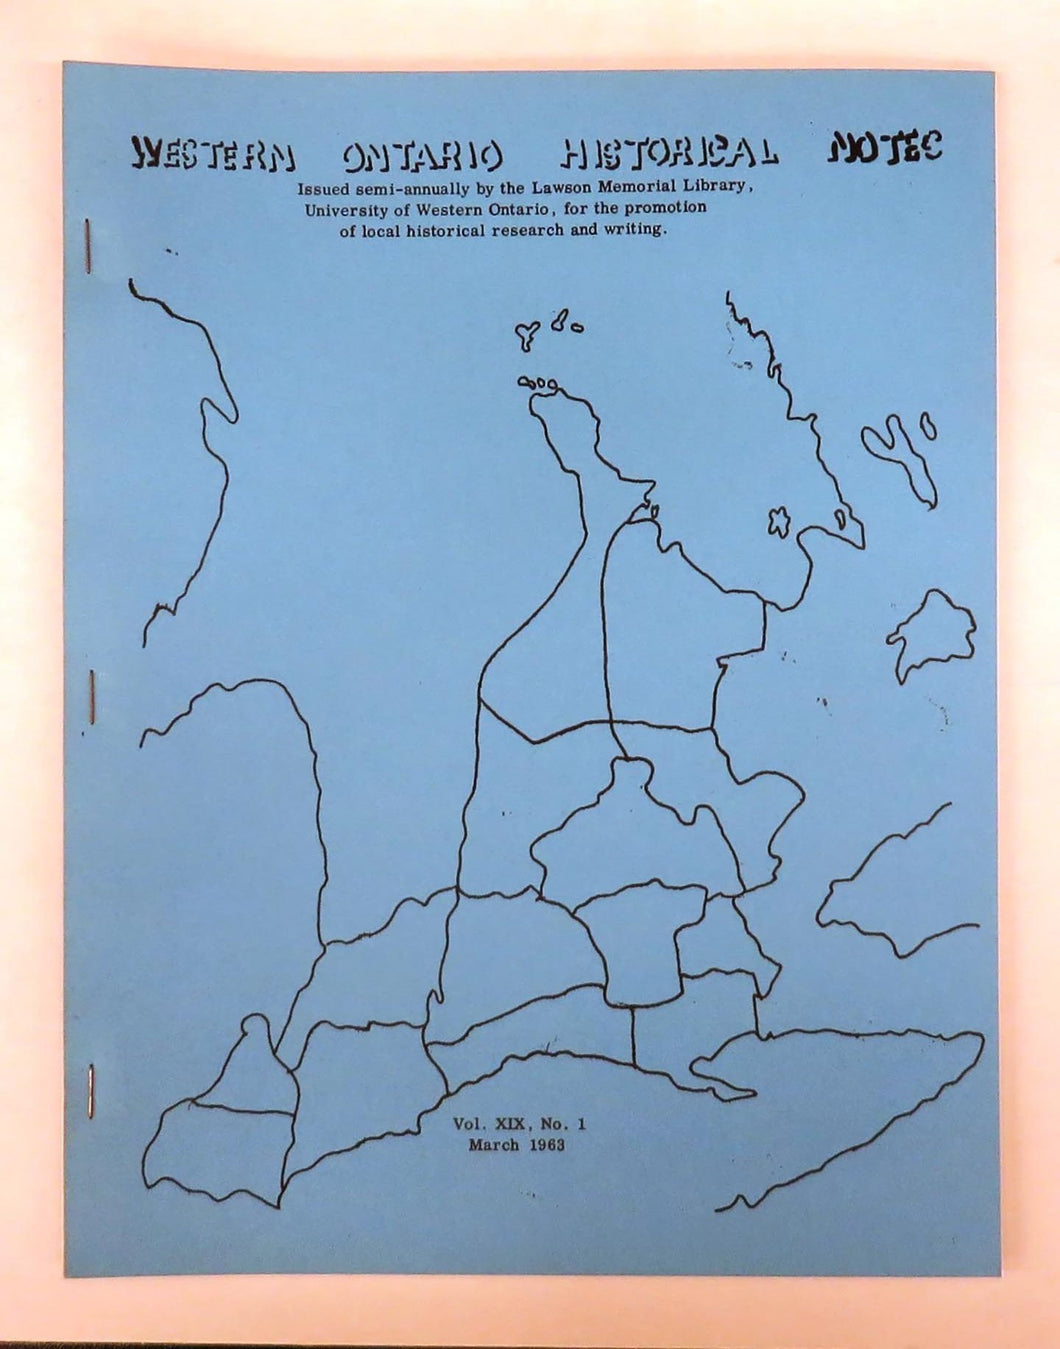 Western Ontario Historical Notes March 1963